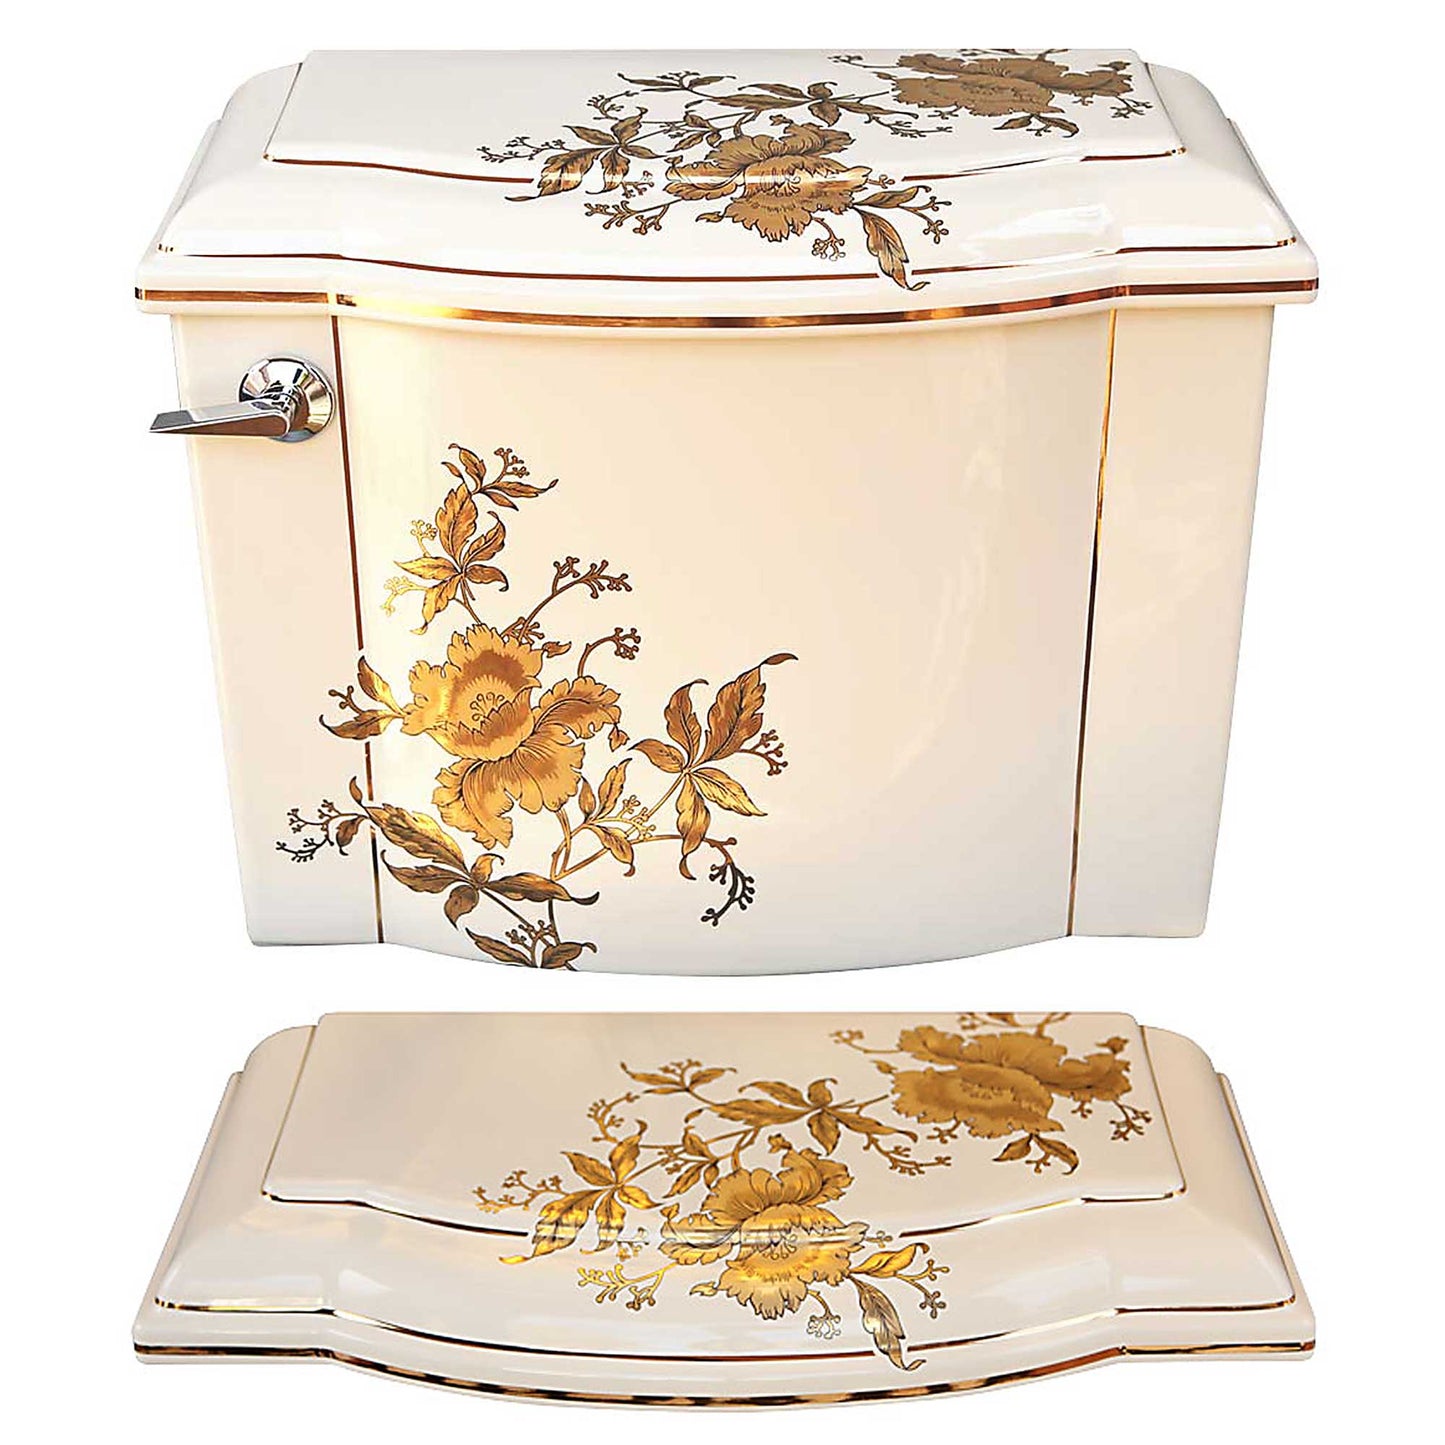 Kohler toilet tank decorated with matte & metallic gold orchids